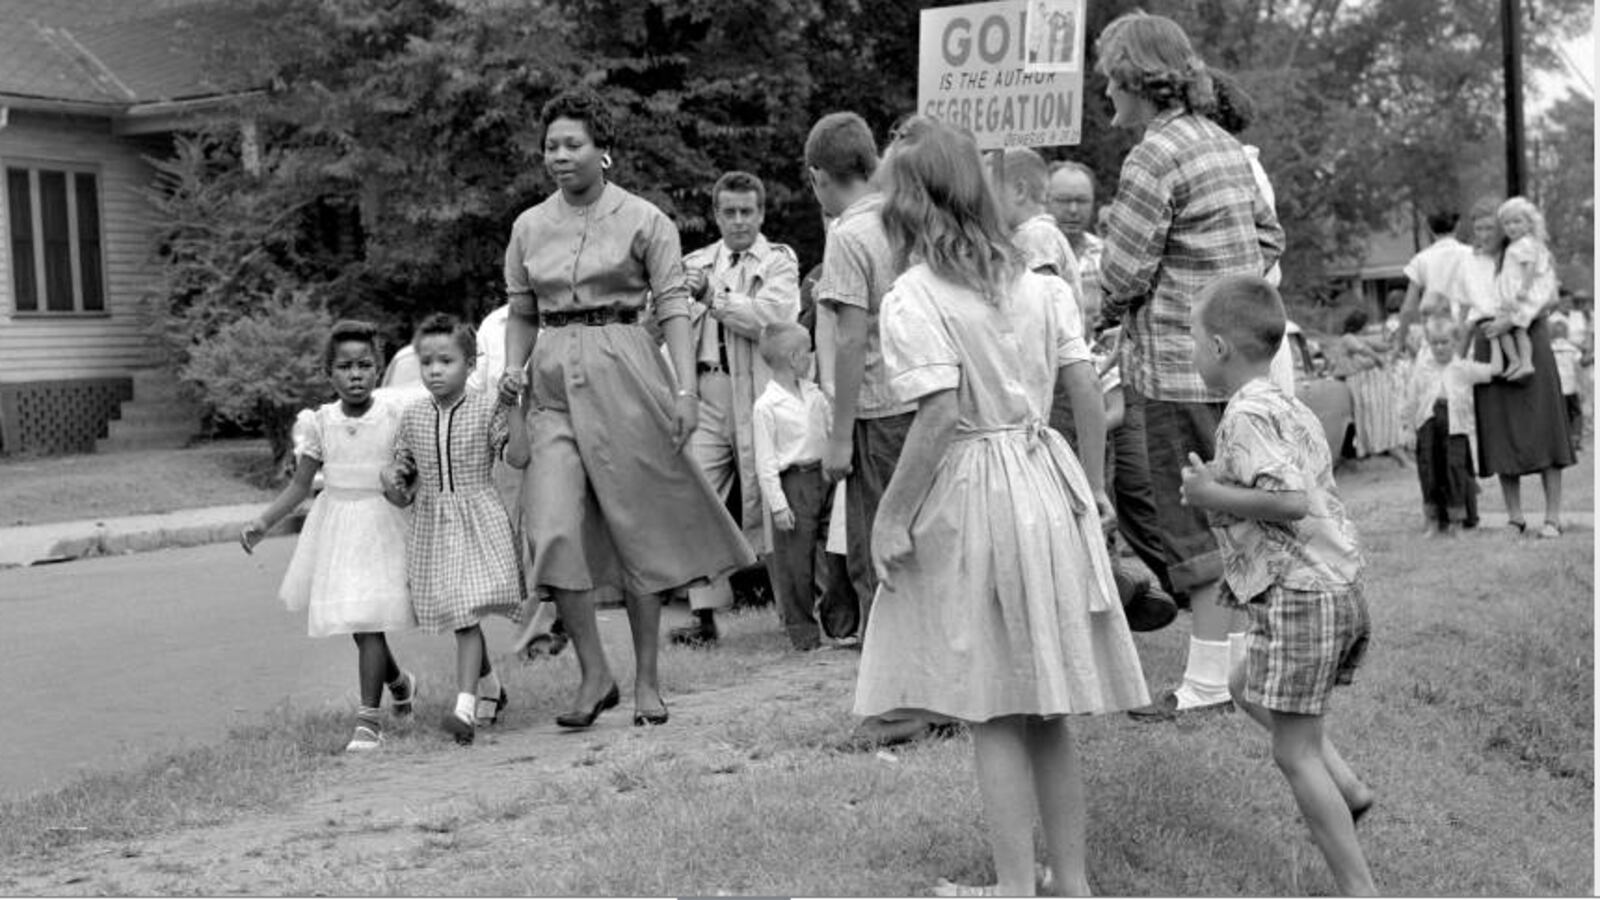 Grace McKinley escorts her daughter Linda Gail and a friend to Fehr Elementary School in Nashville in September 1957 amid Nashvillians protesting desegregation of the city's schools.